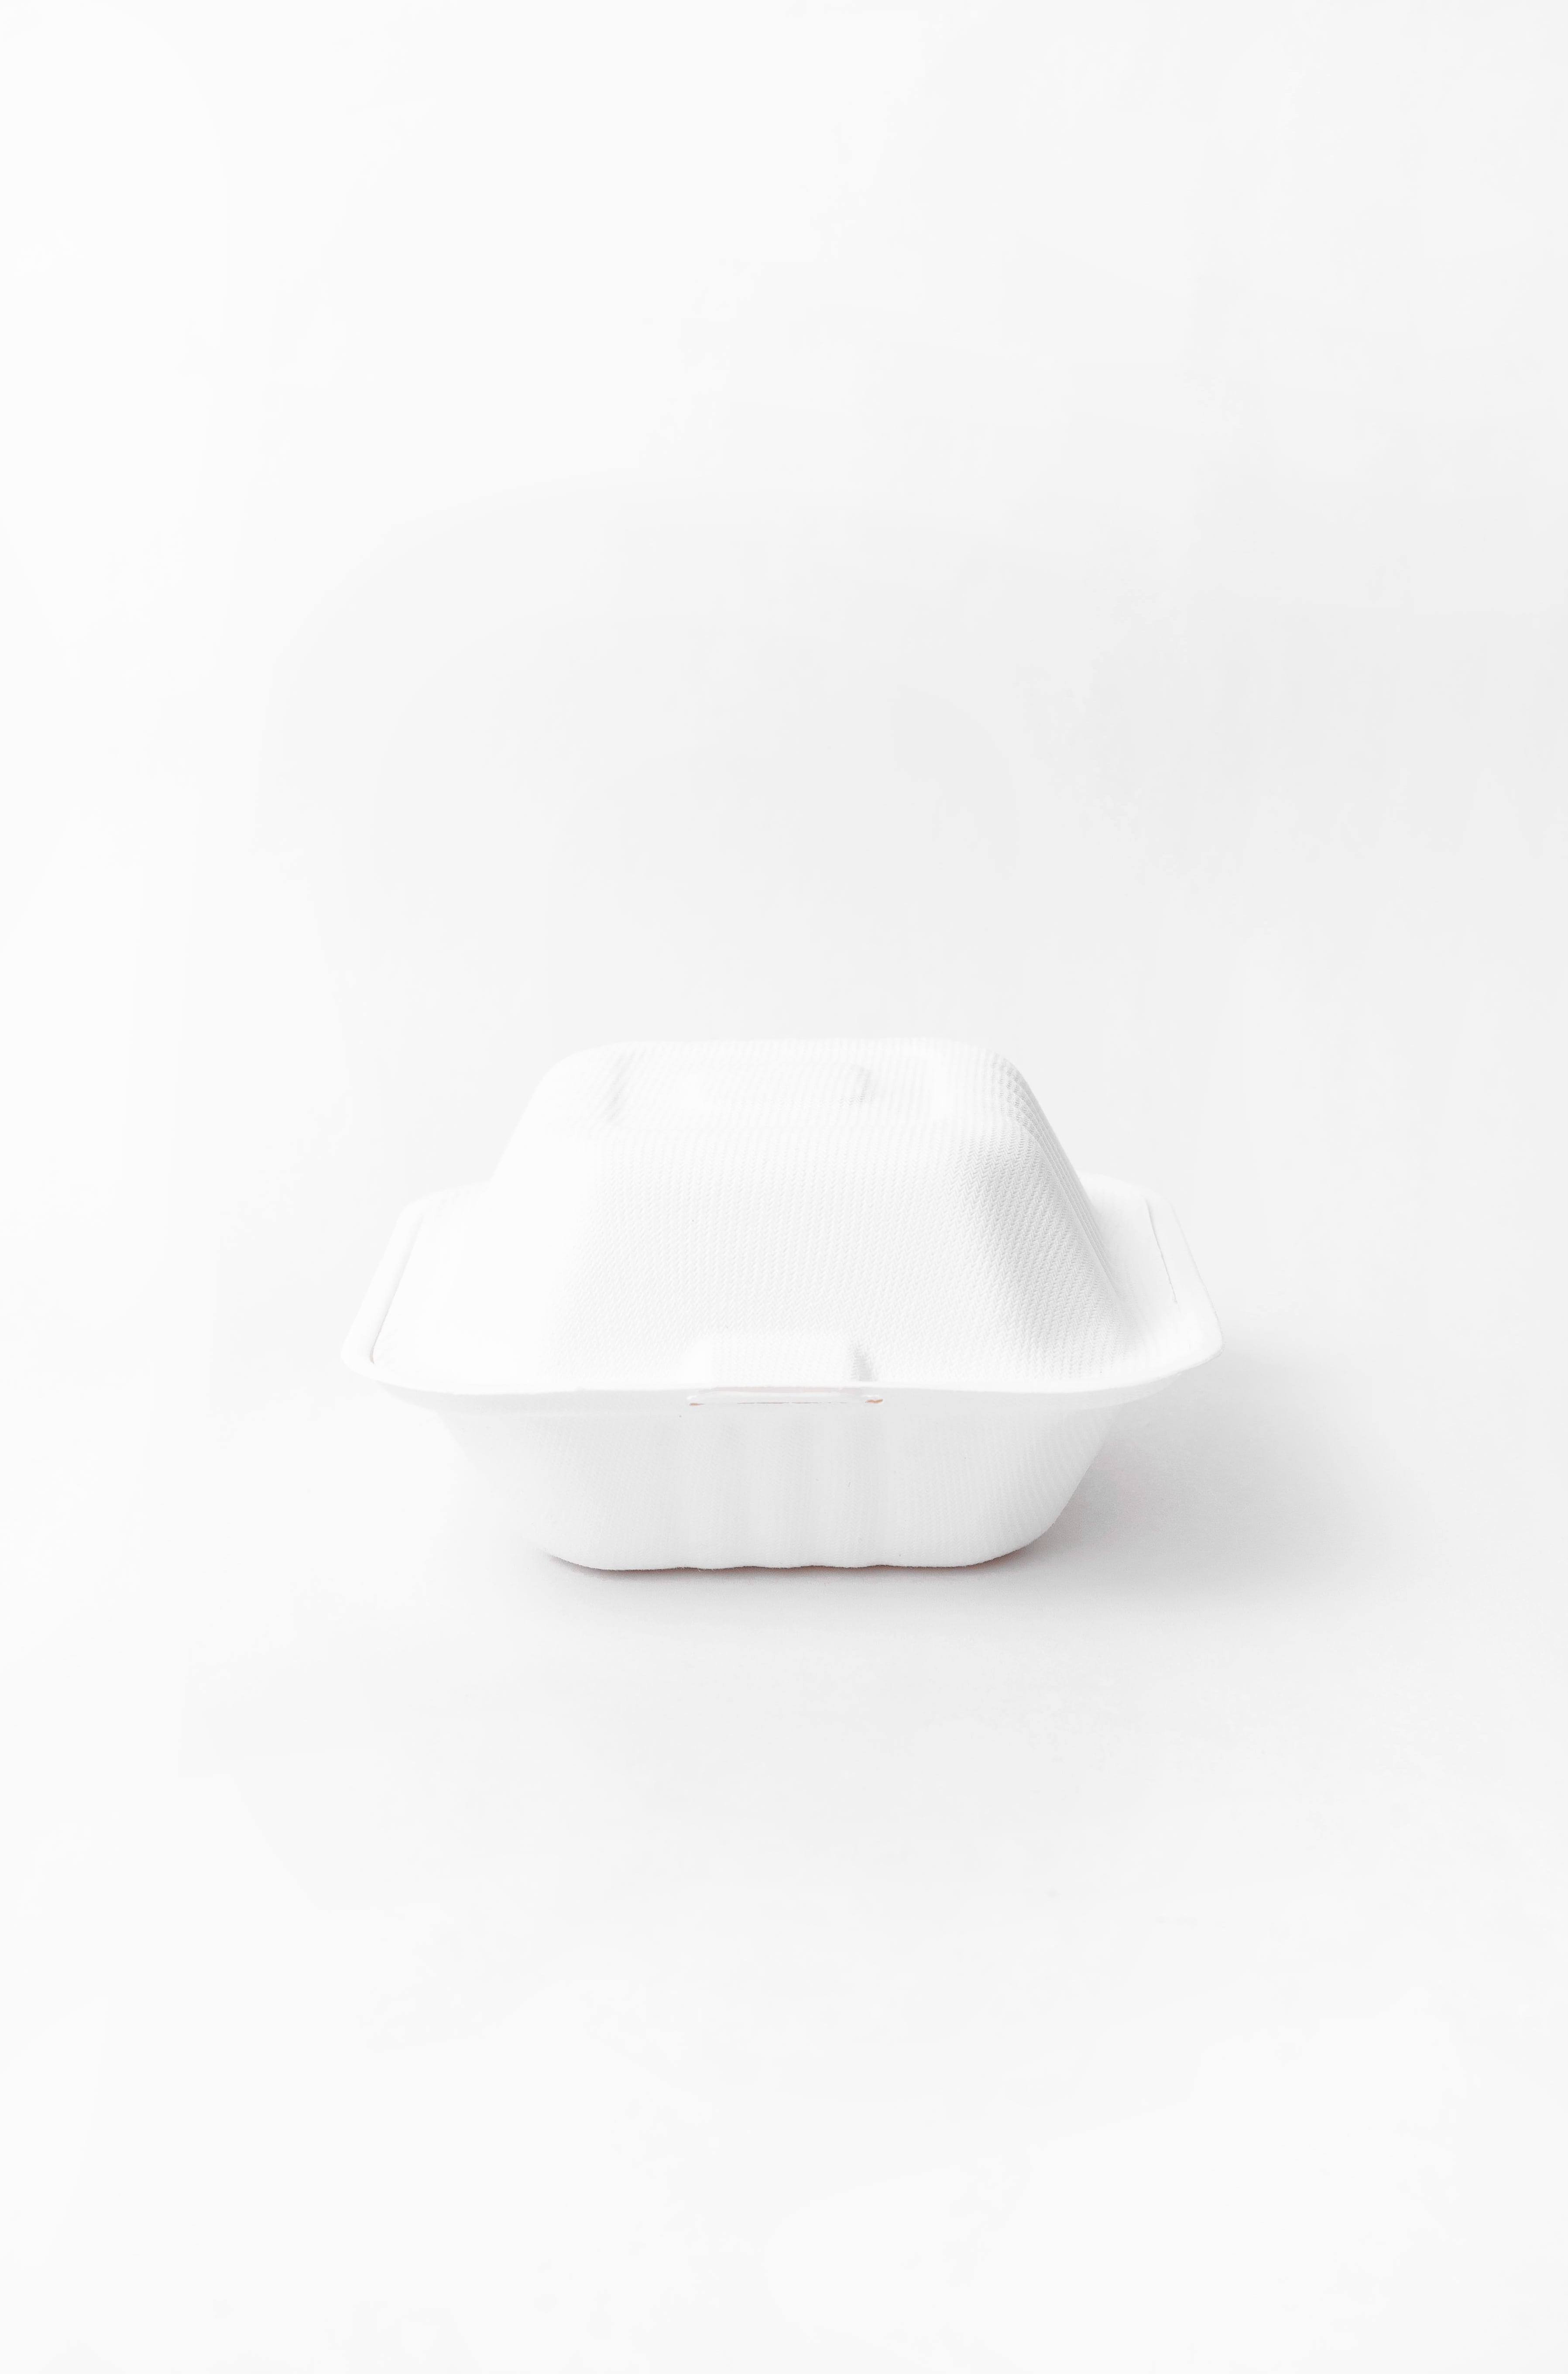 6x6 Compostable Clamshell - 500 count